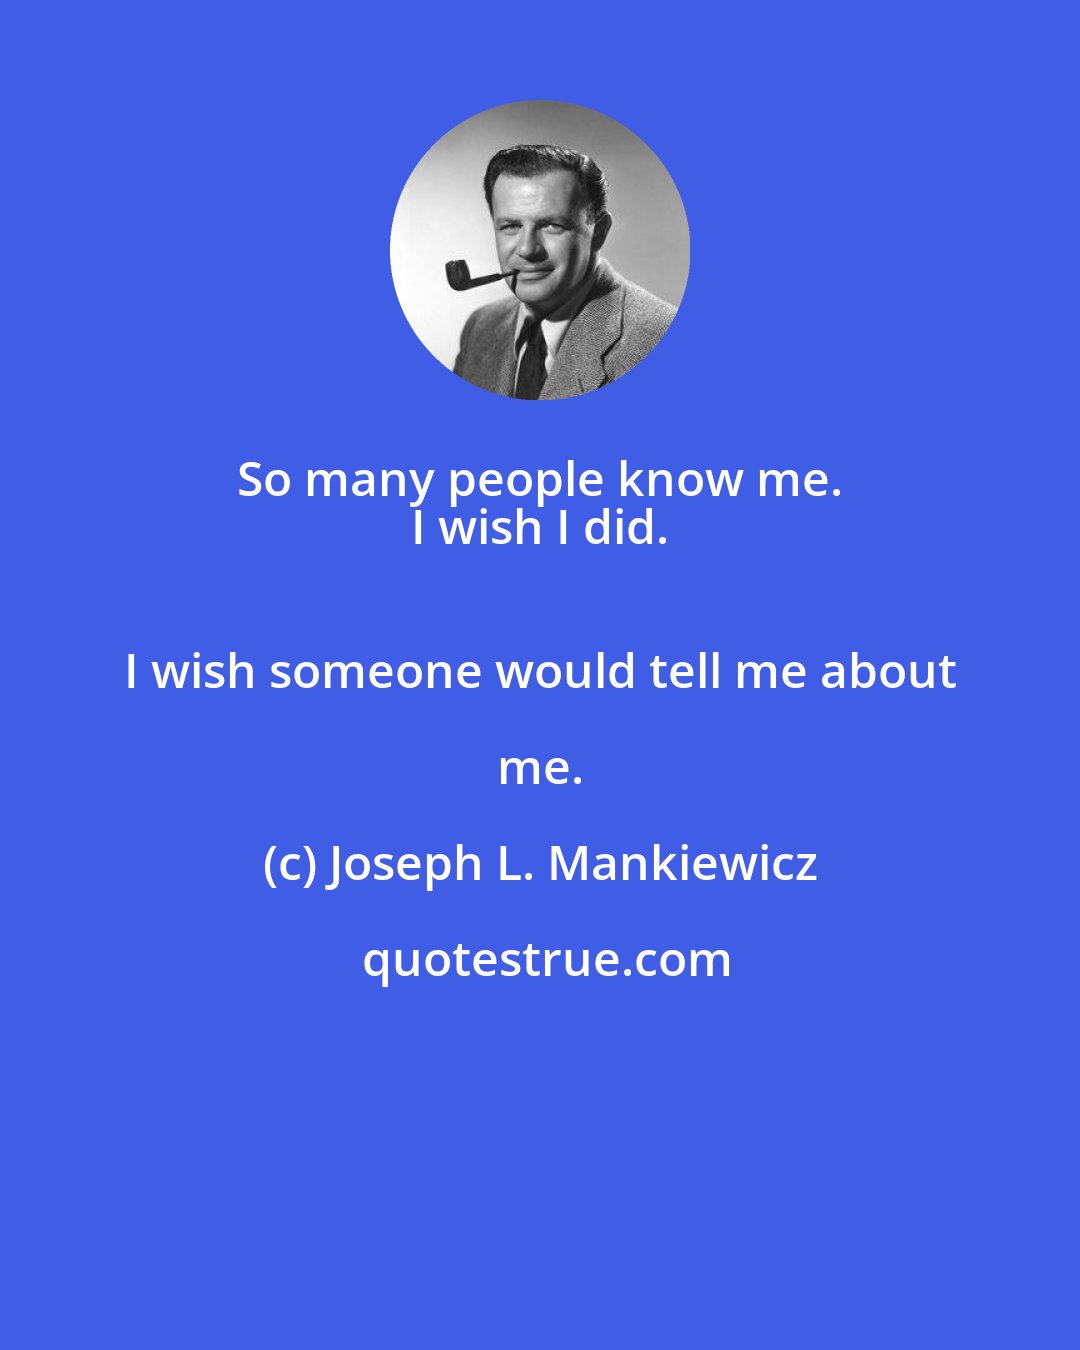 Joseph L. Mankiewicz: So many people know me. 
 I wish I did. 
 I wish someone would tell me about me.